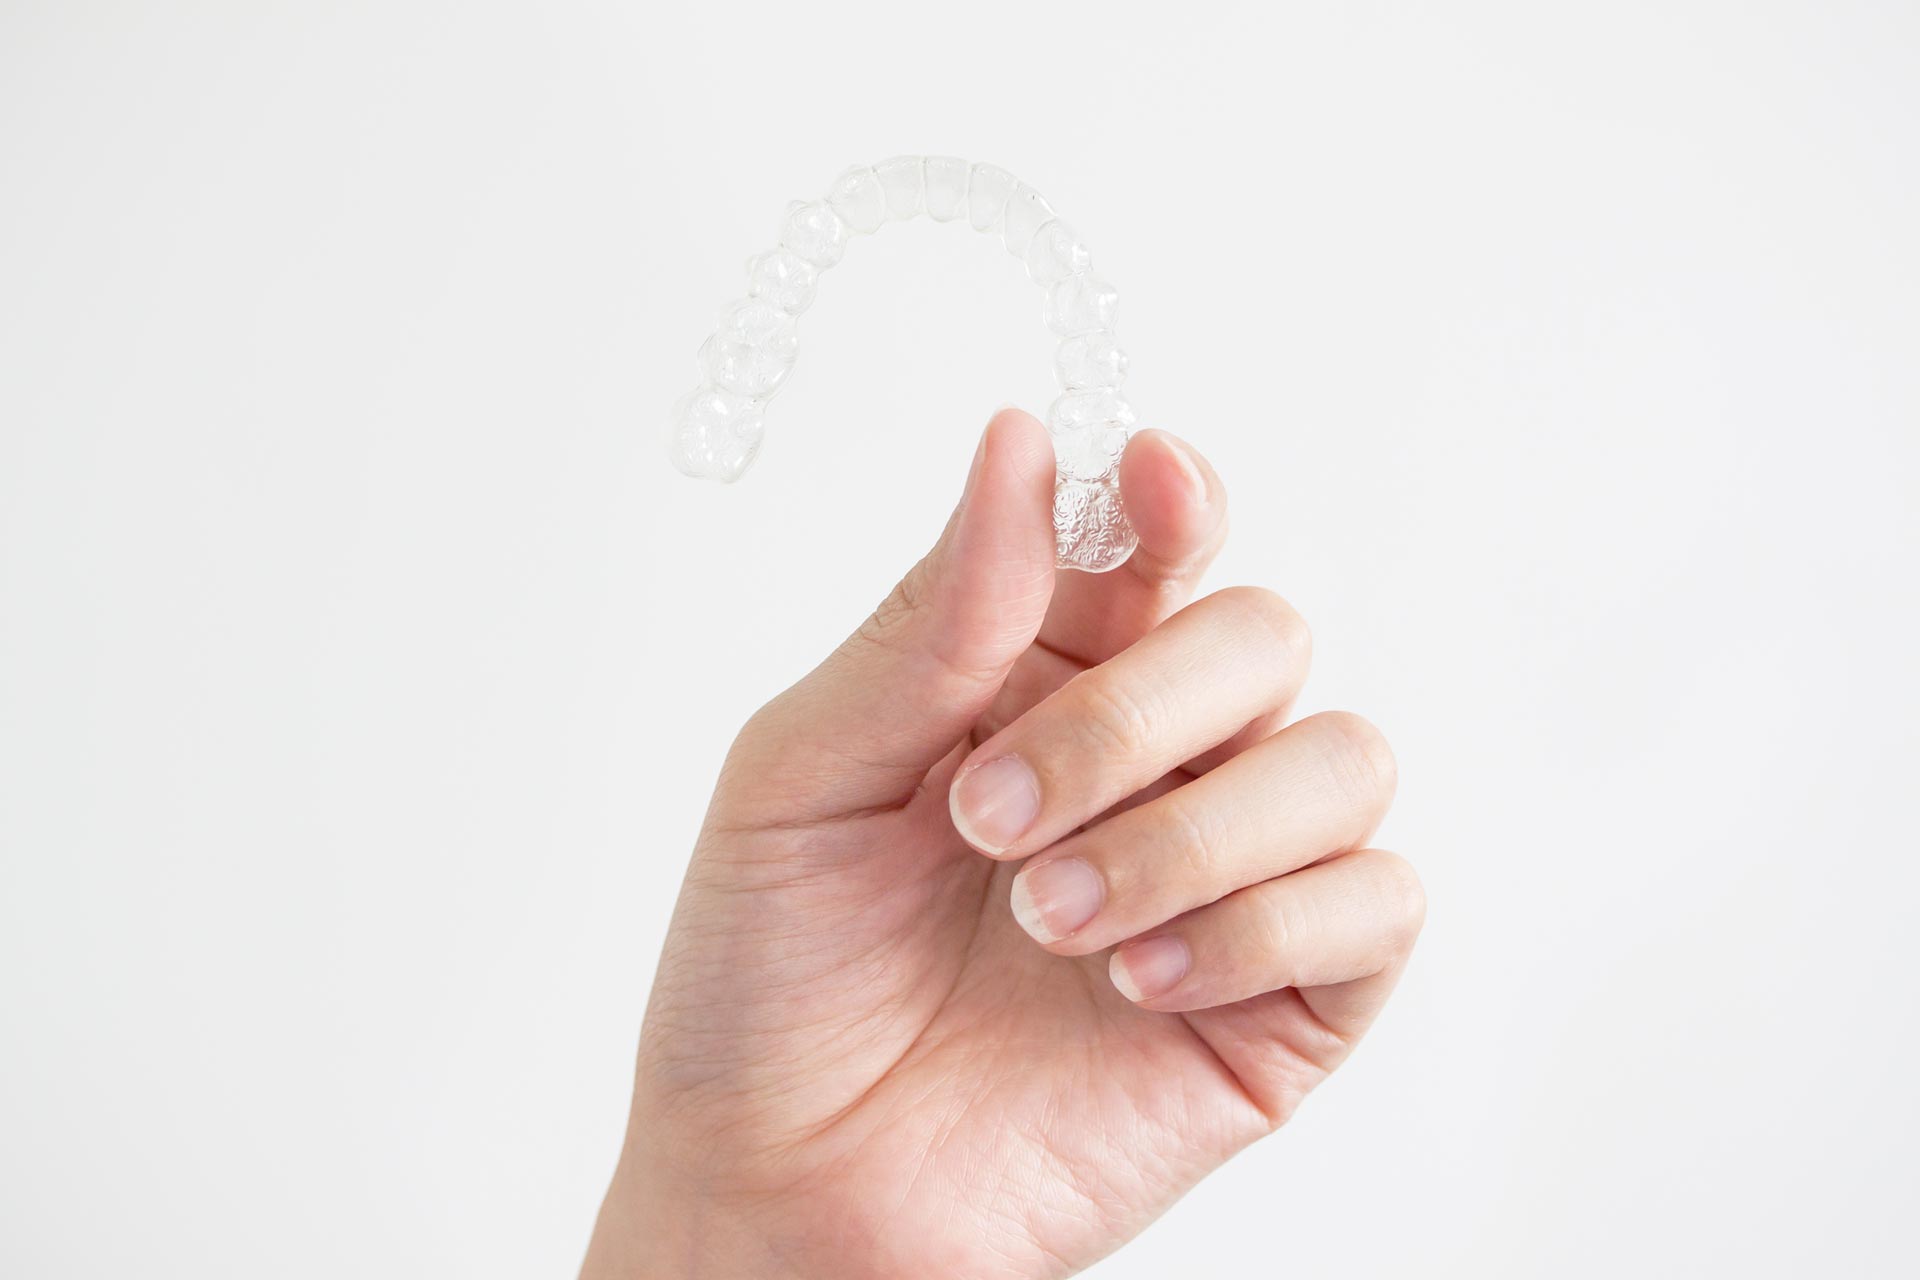 Invisalign Clear Aligners in Singapore